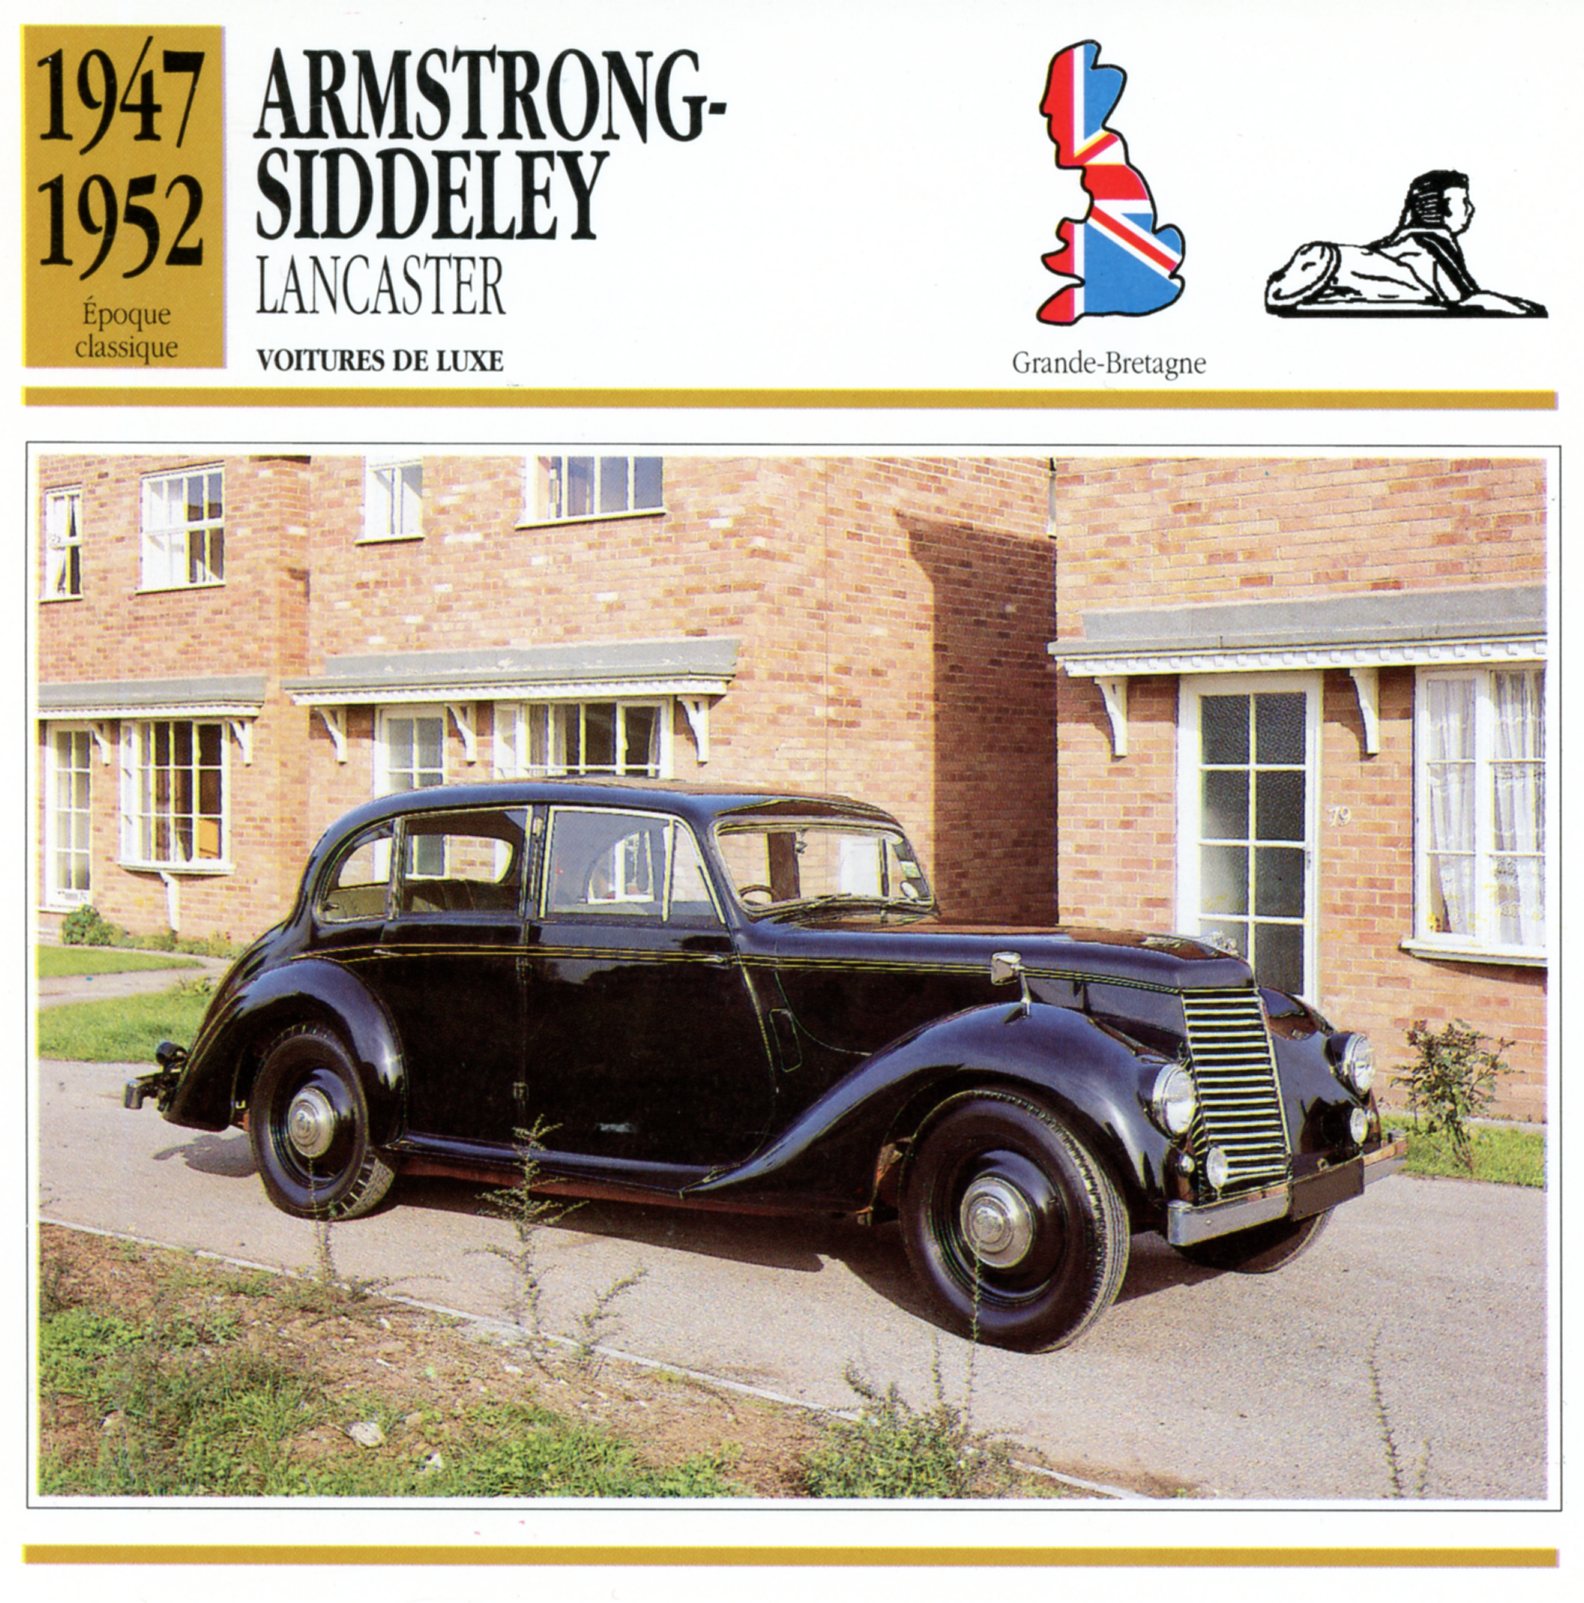 FICHE-AUTO-ARMSTRONG-SIDDELEY-LANCASTER-LEMASTERBROCKERS-CARS-CARD